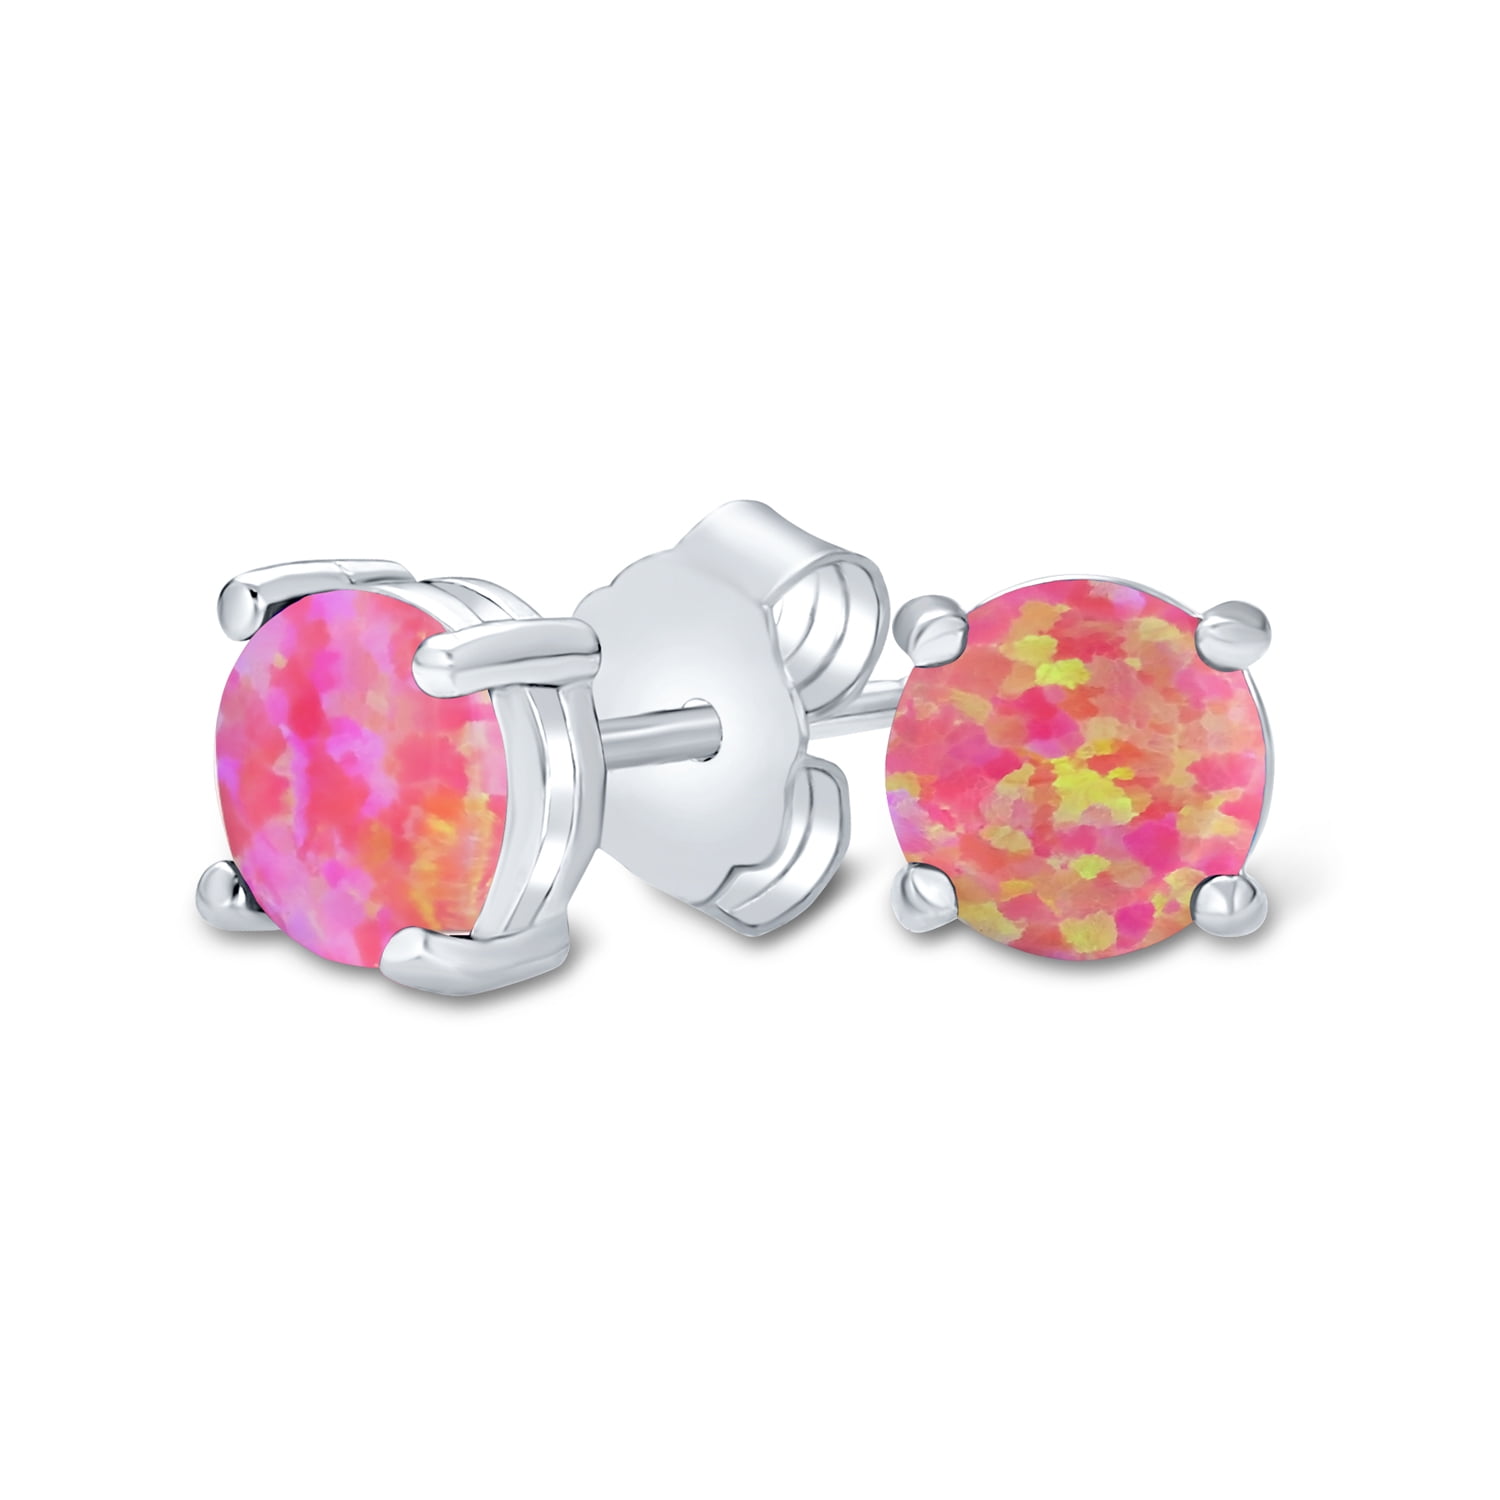 6mm Pink Opal Stud Earrings in Sterling Silver 4 Prong Solitaire Setting Women's